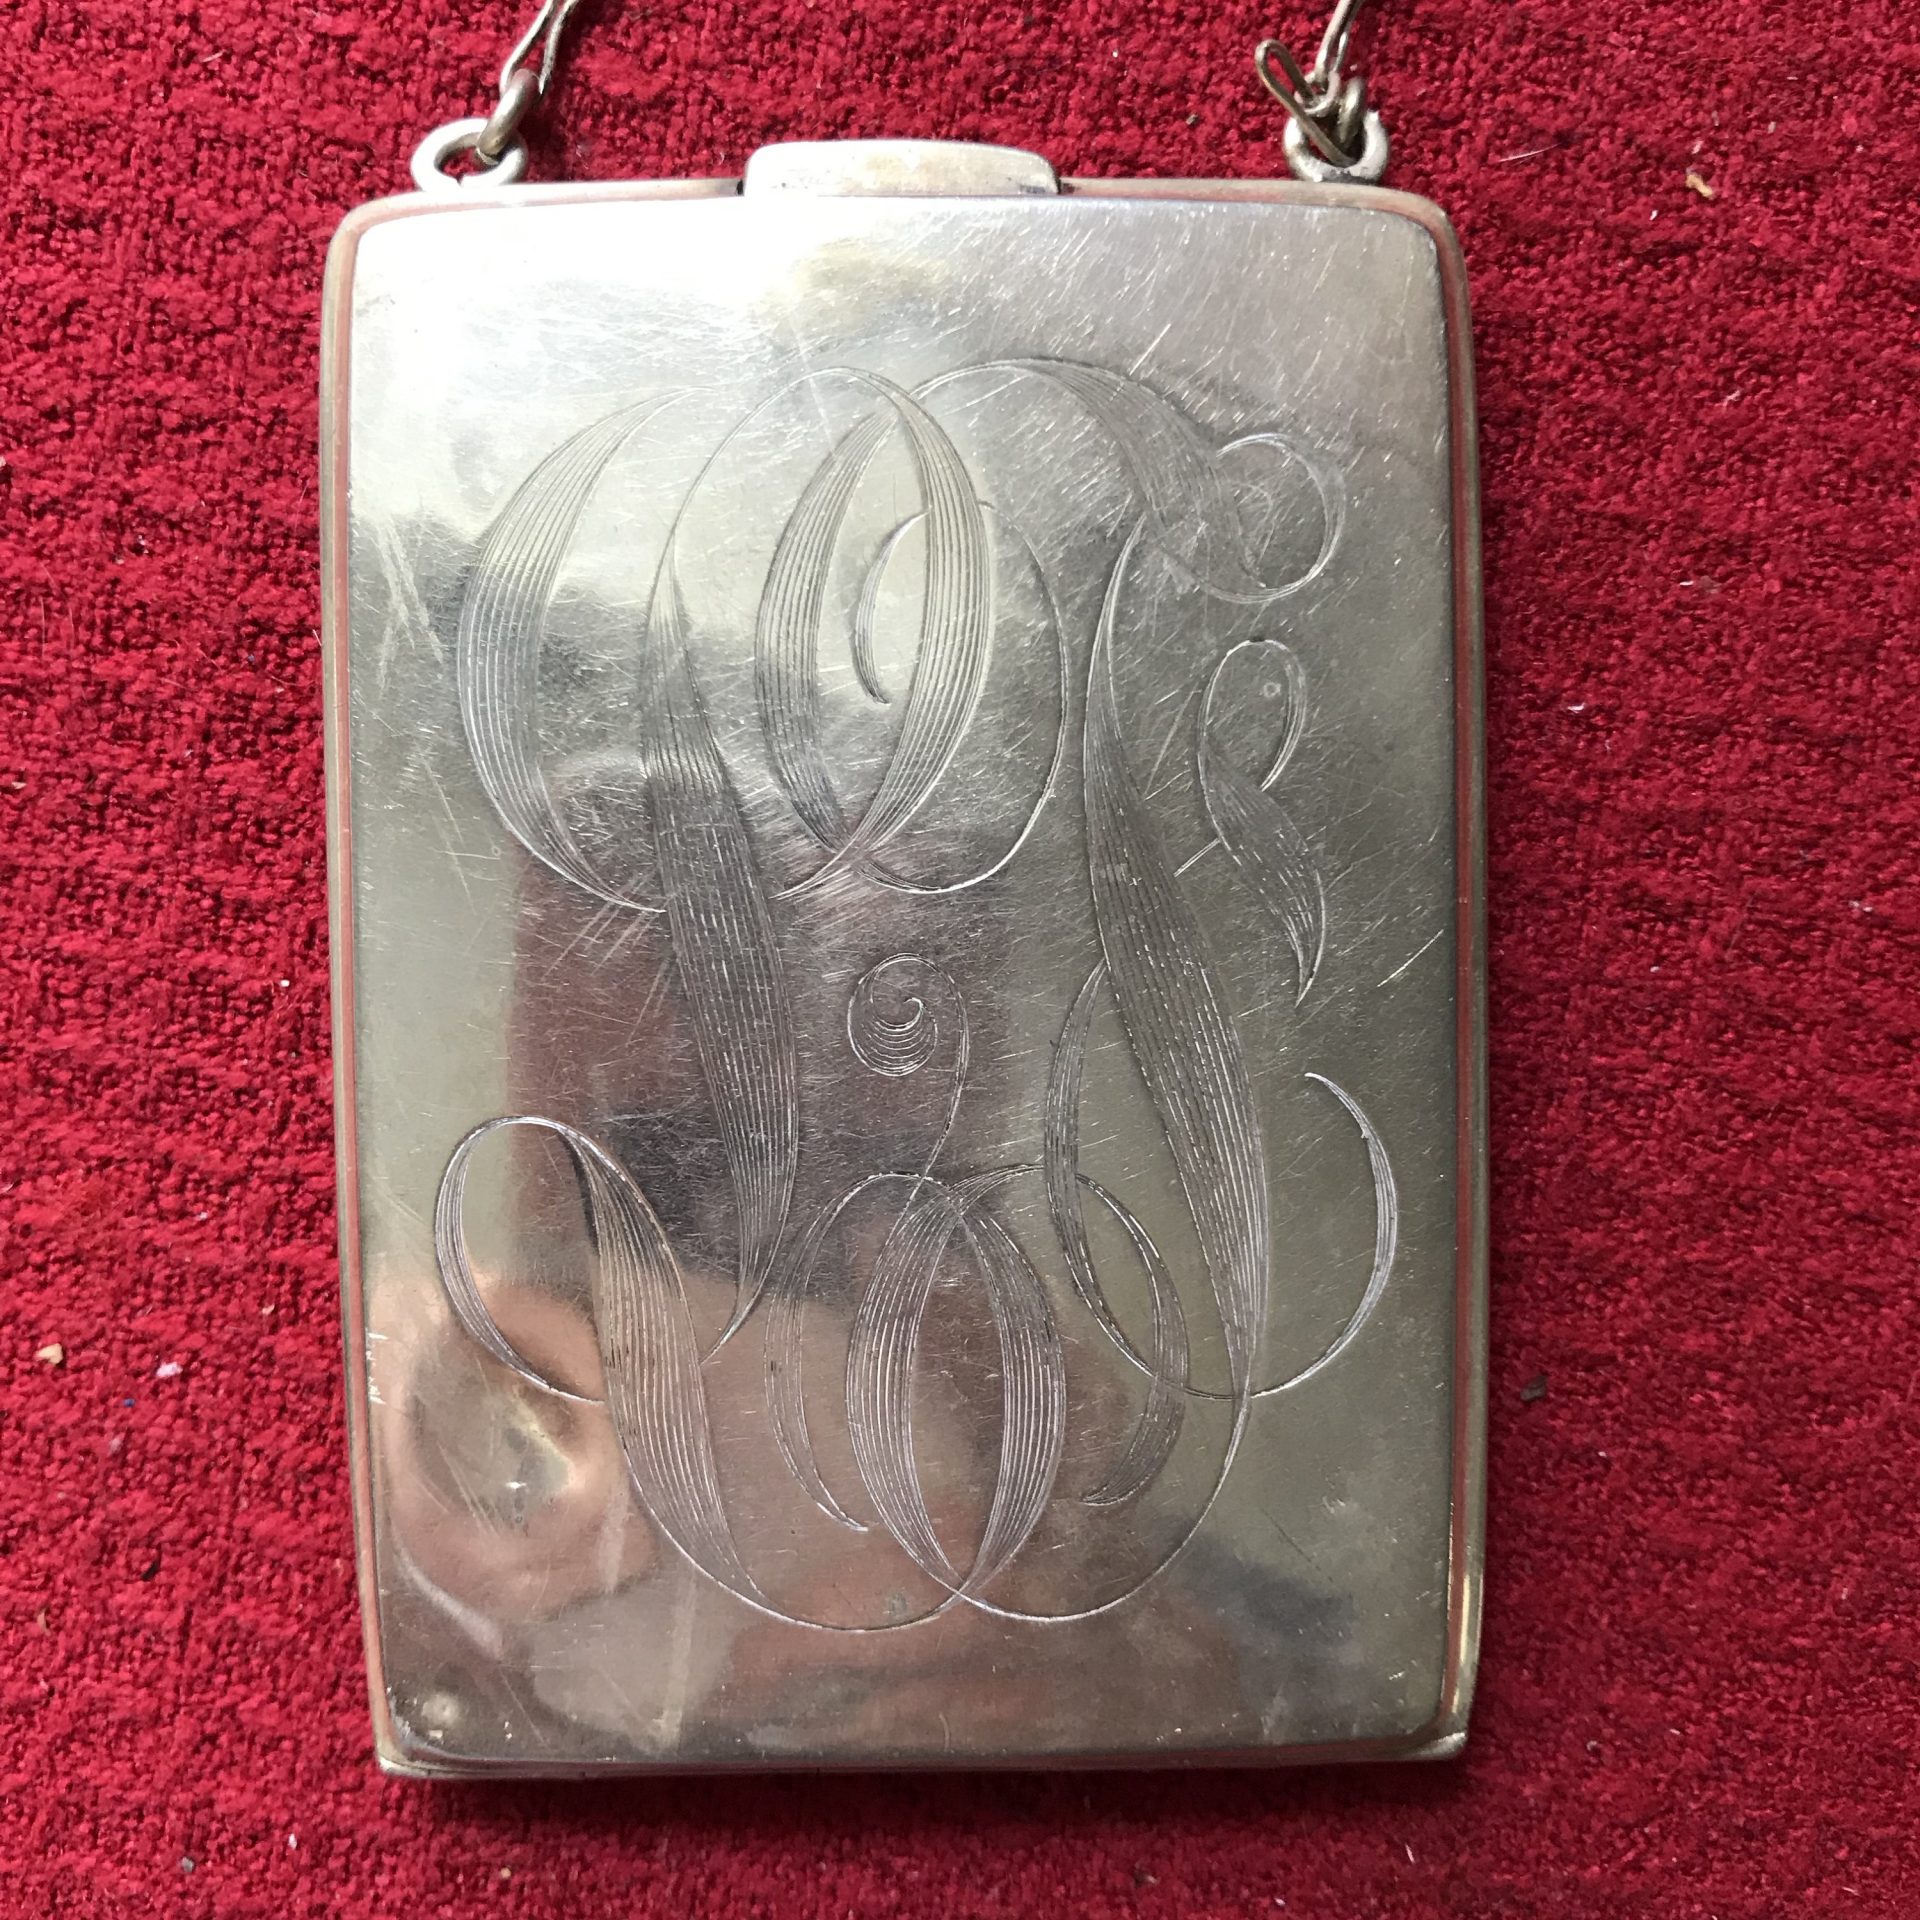 At Auction: (2) ENGLISH STERLING SILVER PURSE ON CHAIN & CIGARETTE CASE